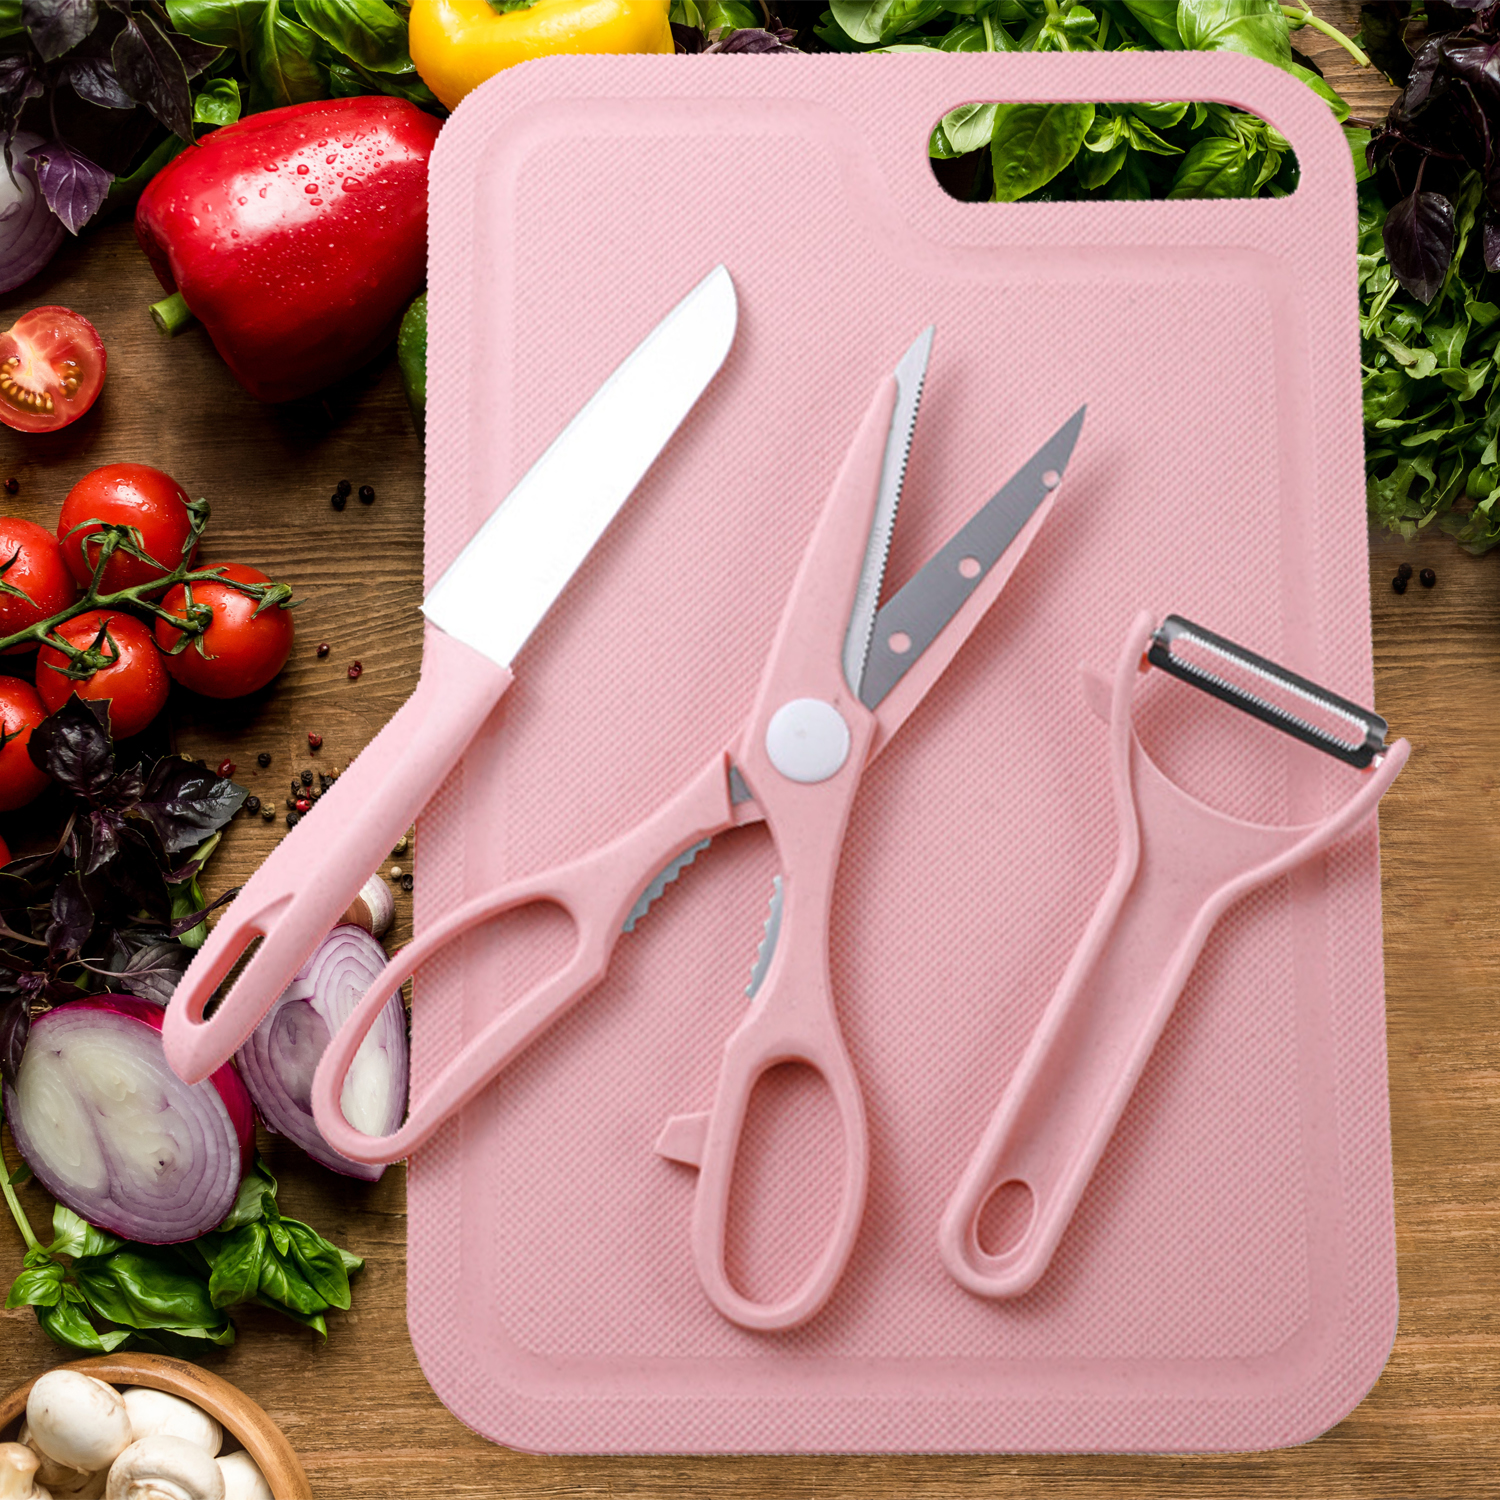 Kitchen Gadgets Chopping Board Set Stainless Steel Kitchen Knife Set Knife Chopping Board Fruit Vegetable Peelers Kitchen Gadgets Knife Set